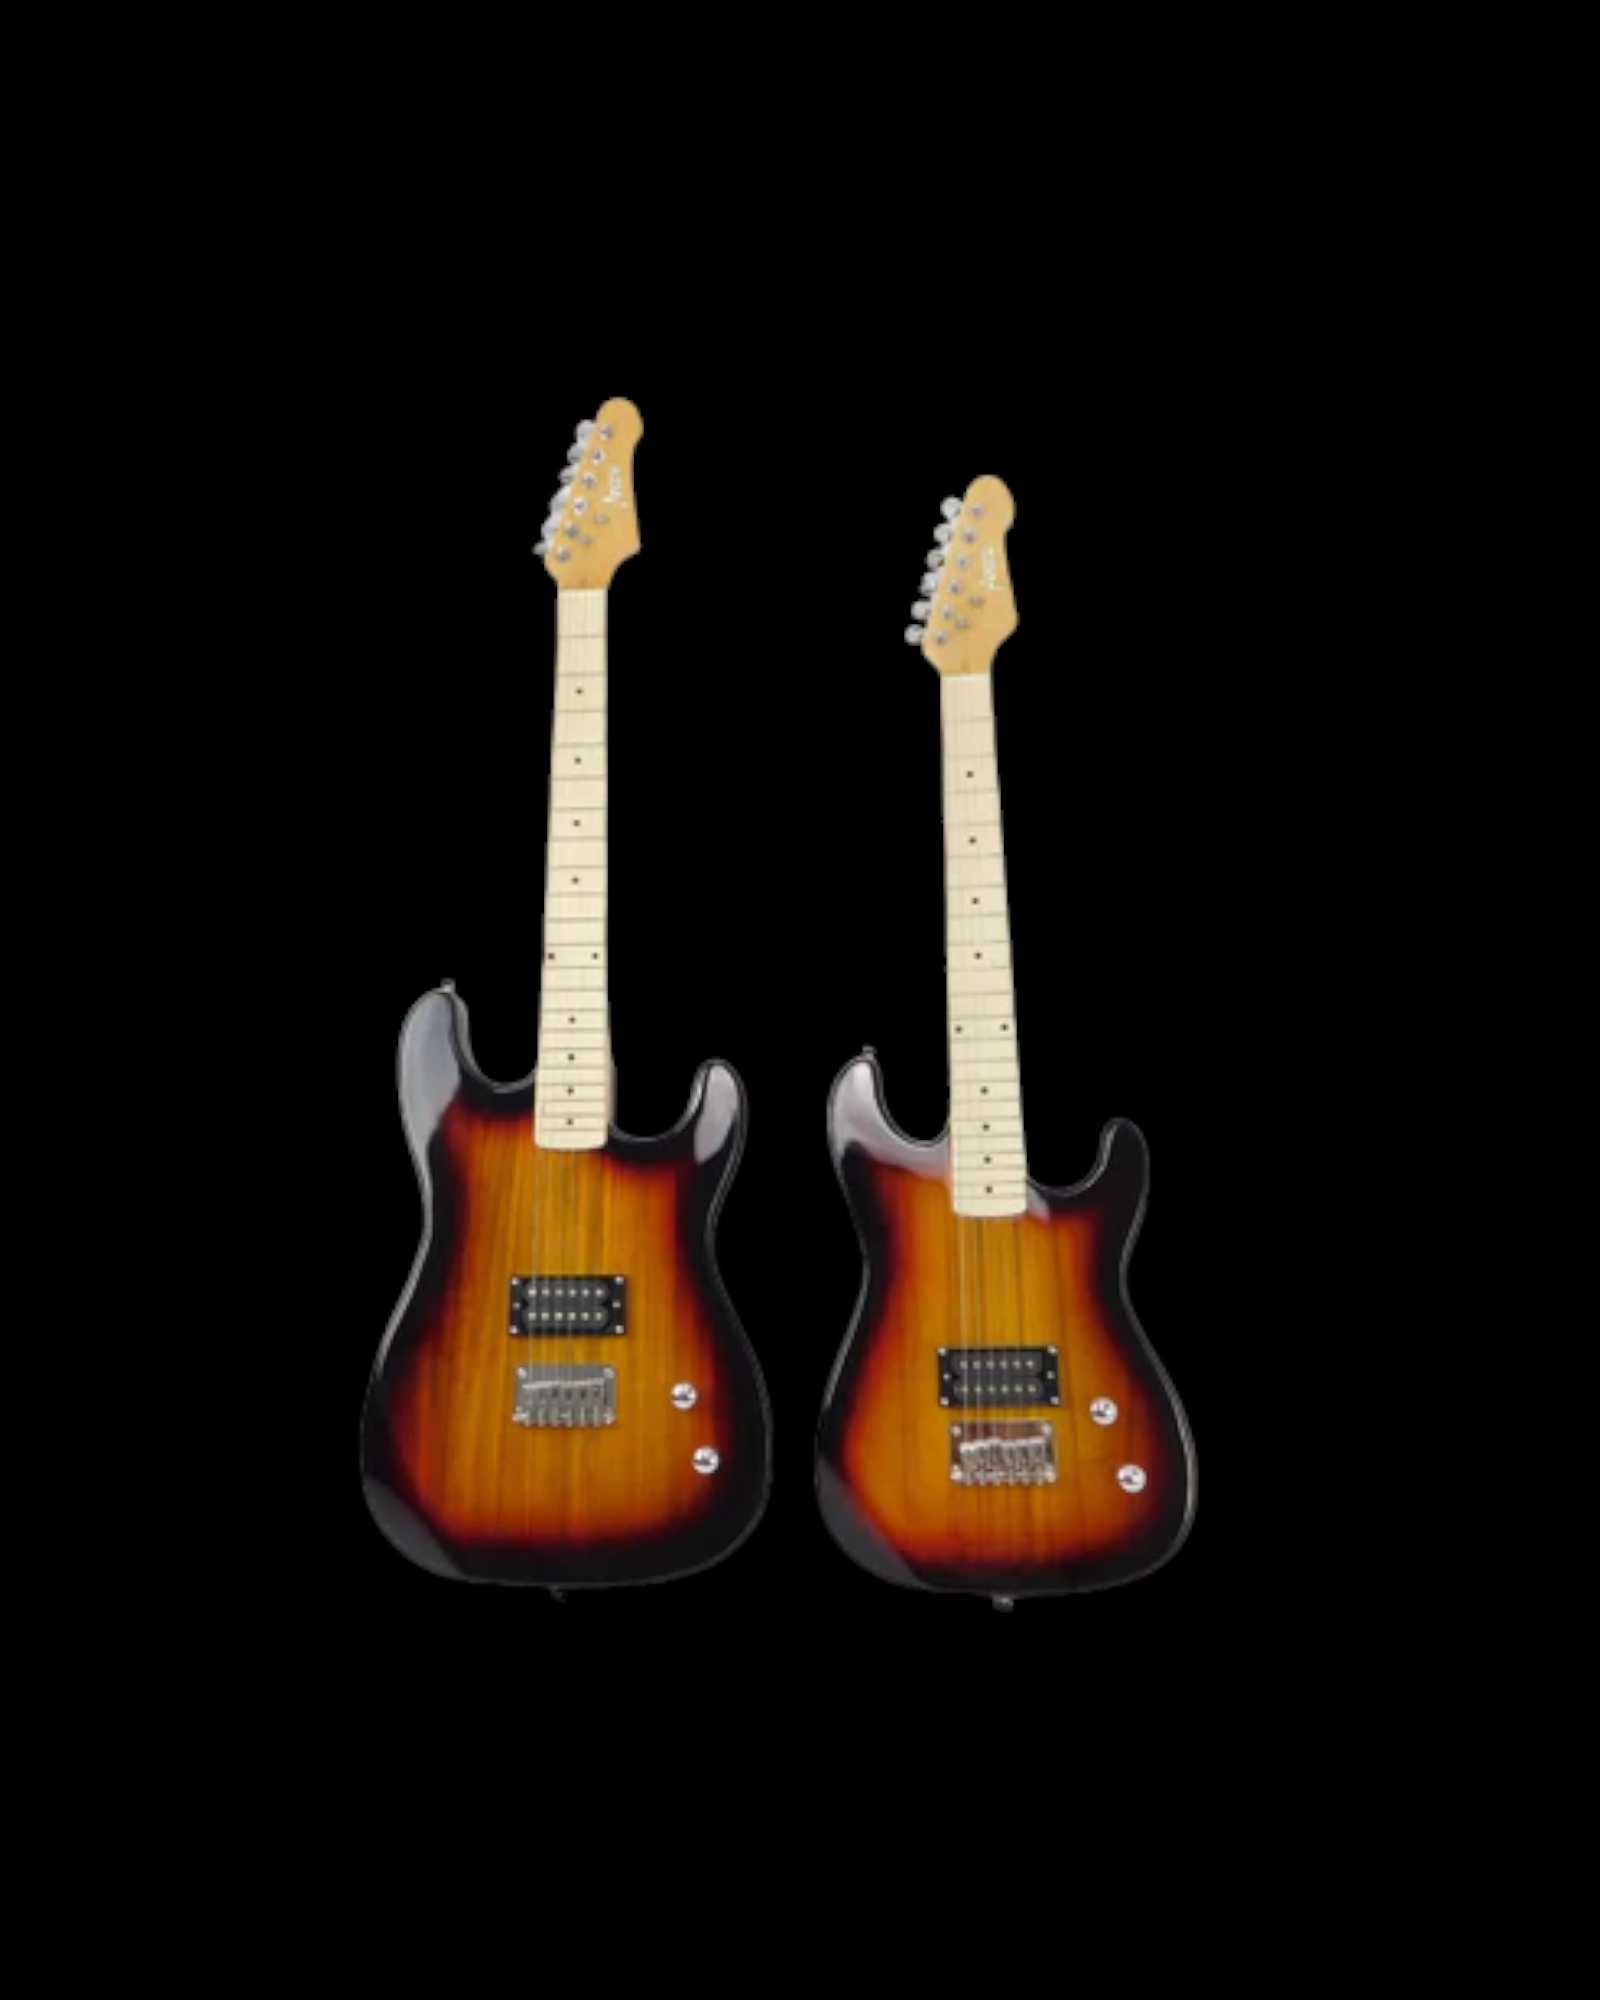 Haze HST Electric Guitar - HJS22STSB- Vintageburst, Available in 4/4 and 3/4 Sizes